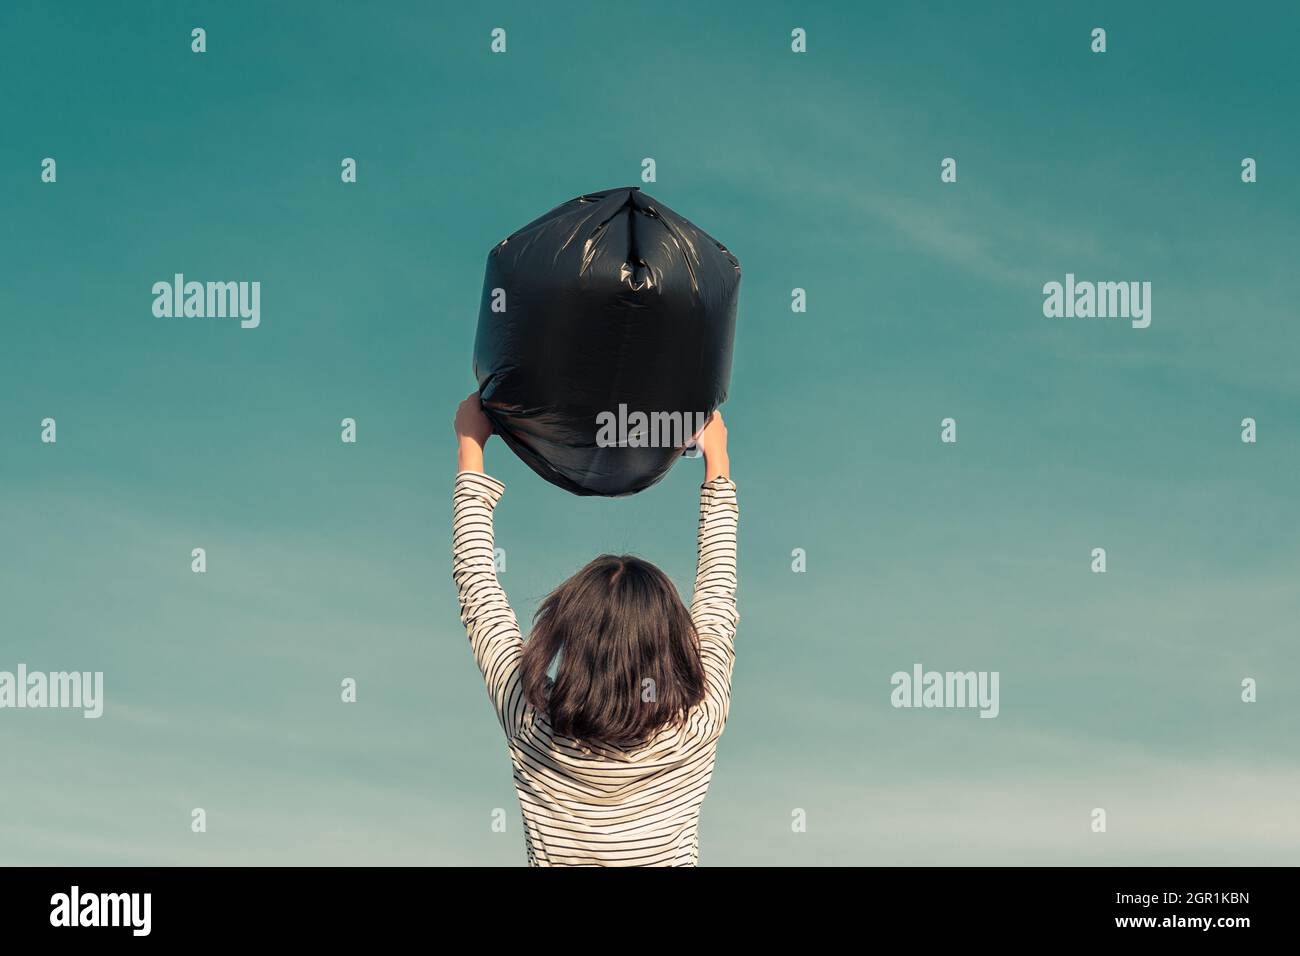 Rear View Of Girl Holding Garbage Bag Against Sky Stock Photo